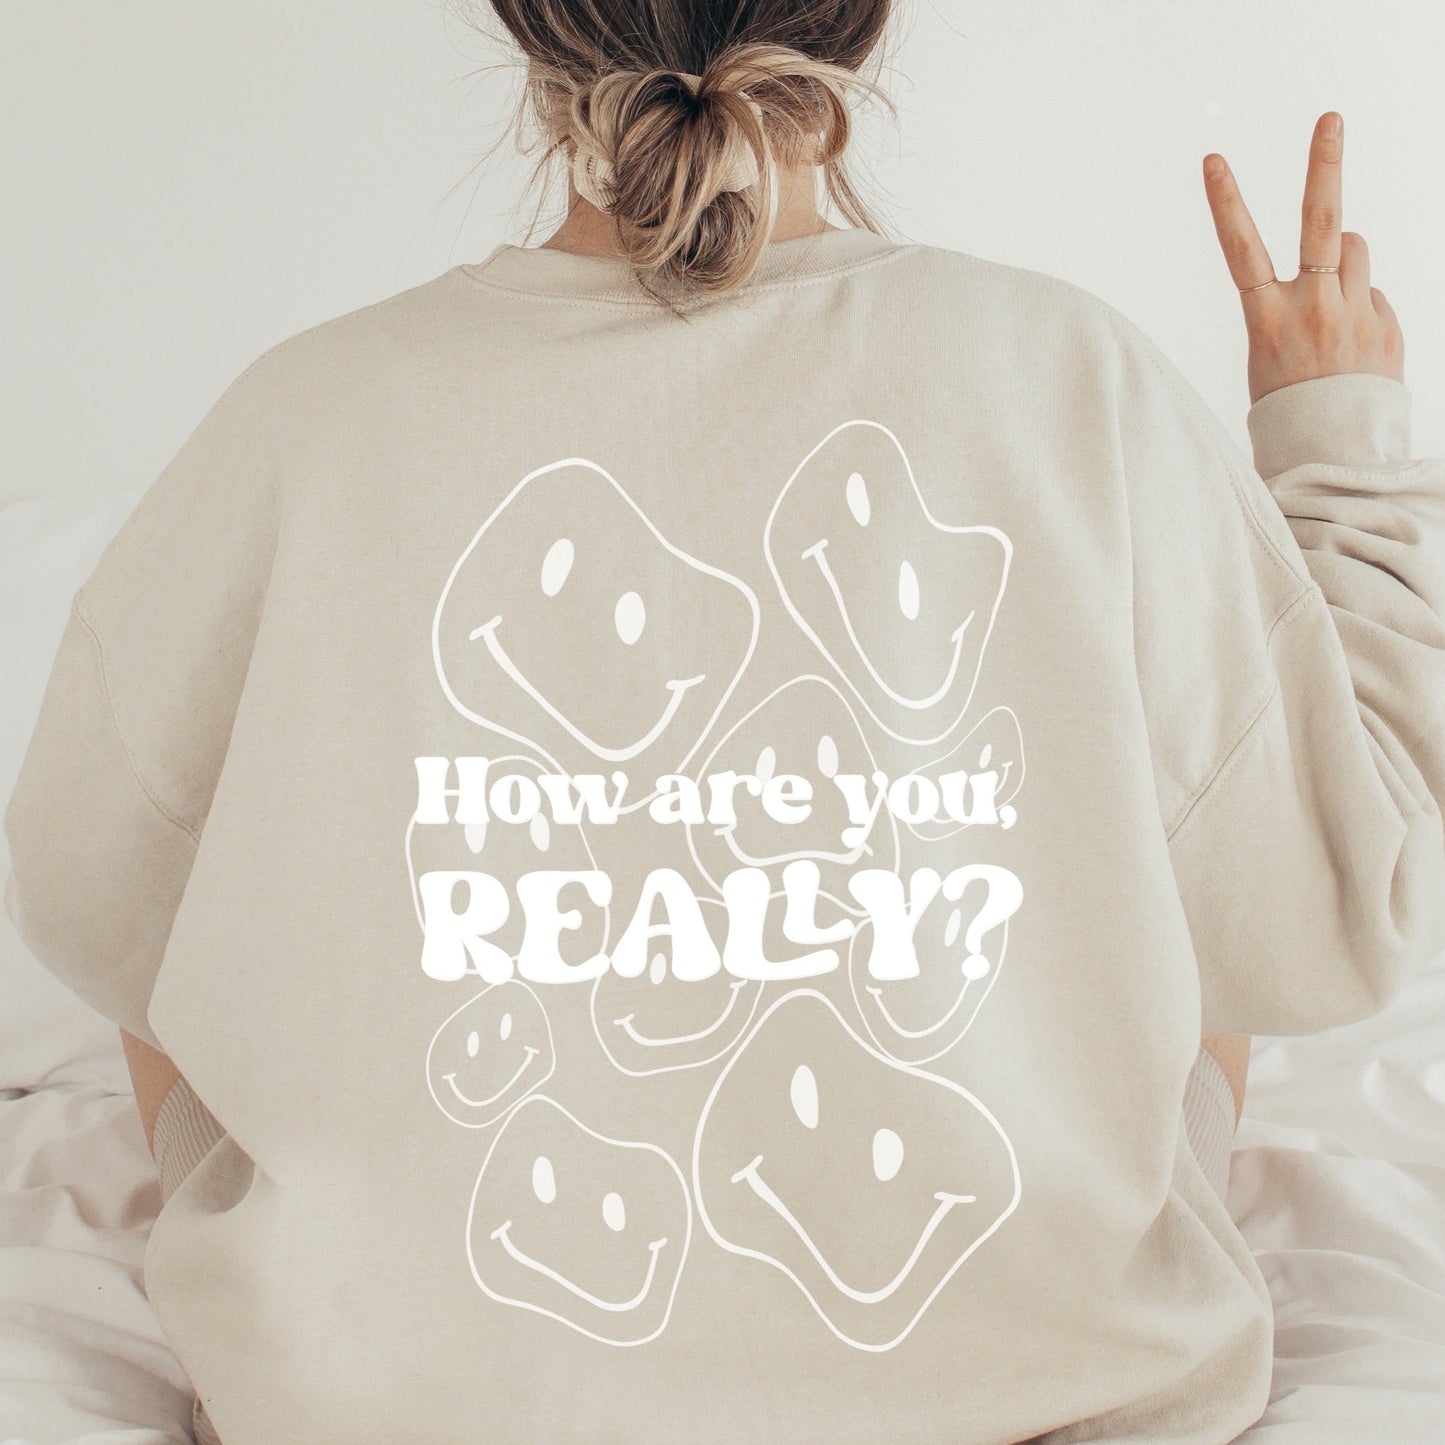 How Are You Really Crewneck - Smiles Crewneck - Screen Printed Sweater- Unisex Neural sweatshirt -